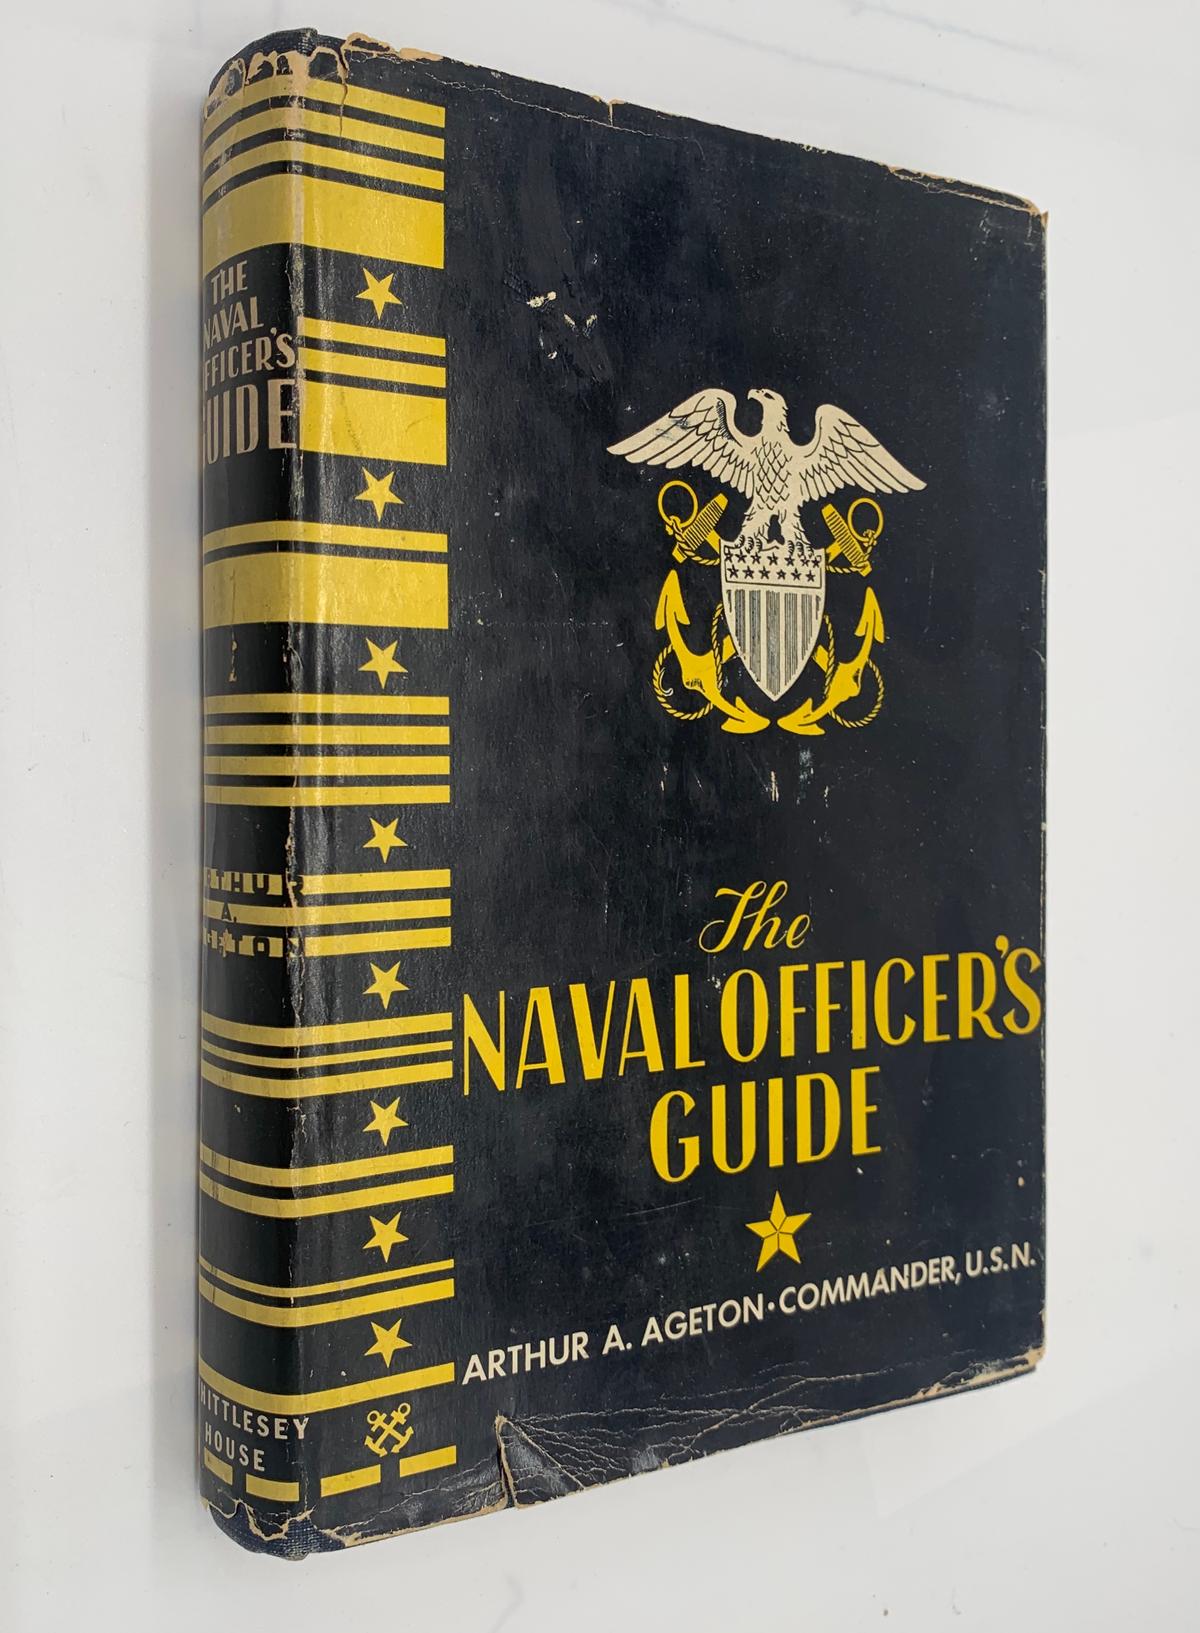 The NAVAL OFFICER'S GUIDE (1946)